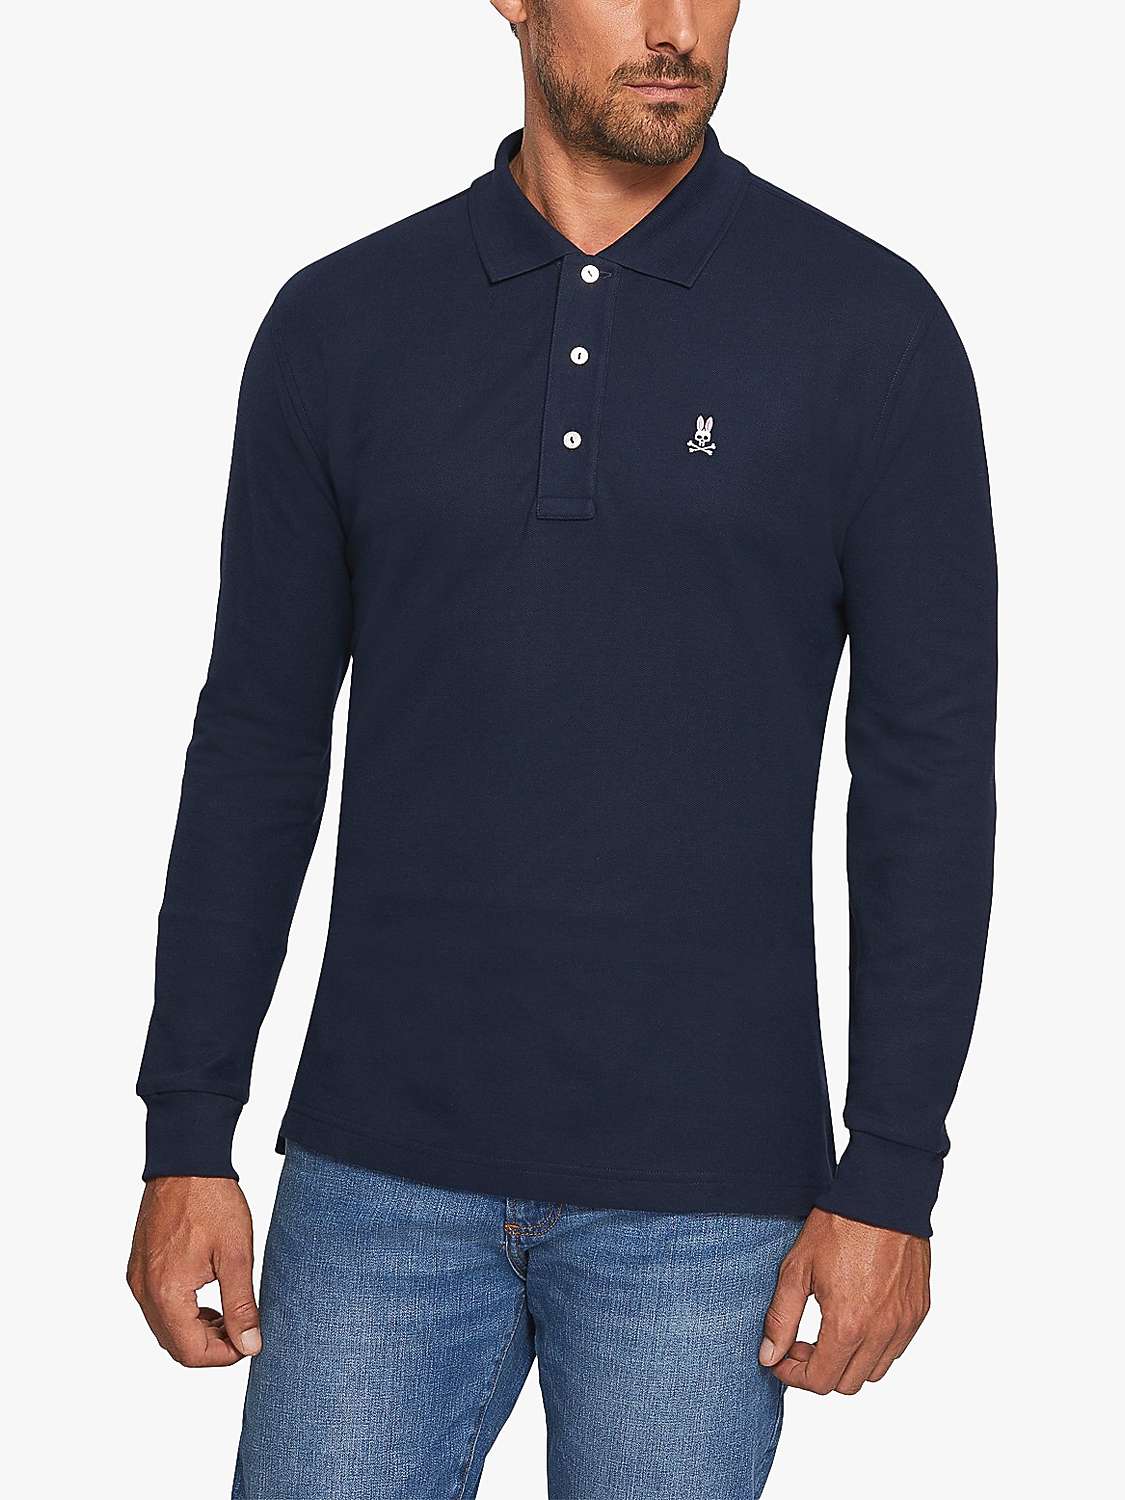 Buy Psycho Bunny Classic Long Sleeve Pique Polo Shirt Online at johnlewis.com